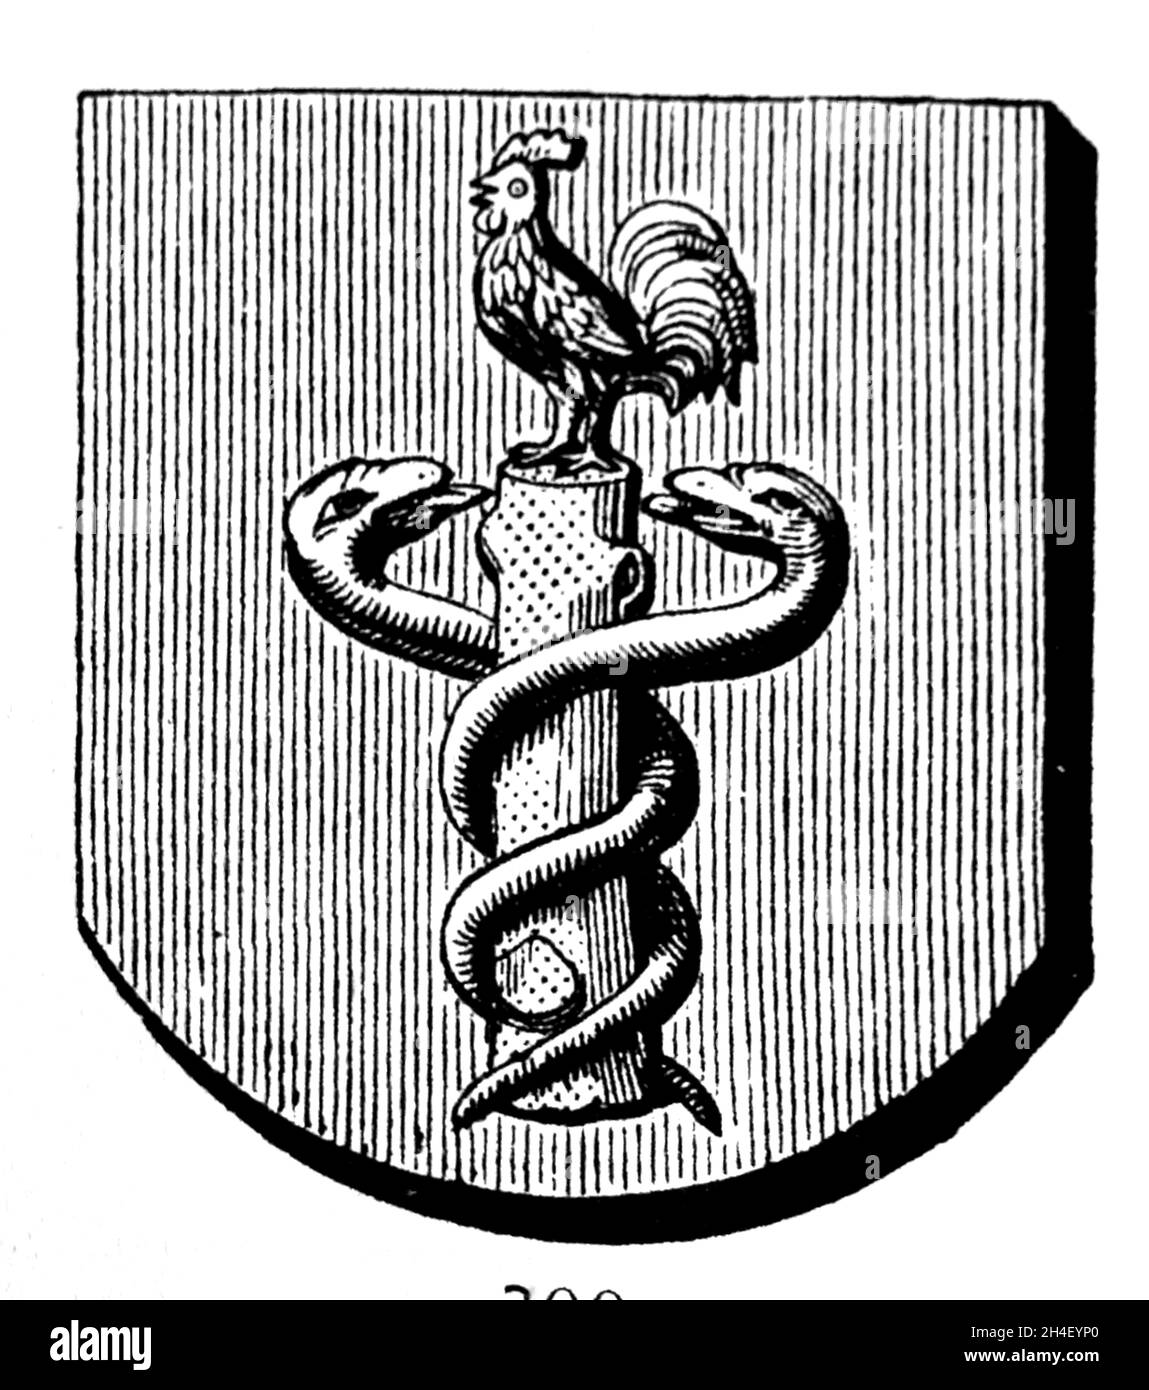 Banner of the corporation of physicians at Vire. Illustration. Stock Photo